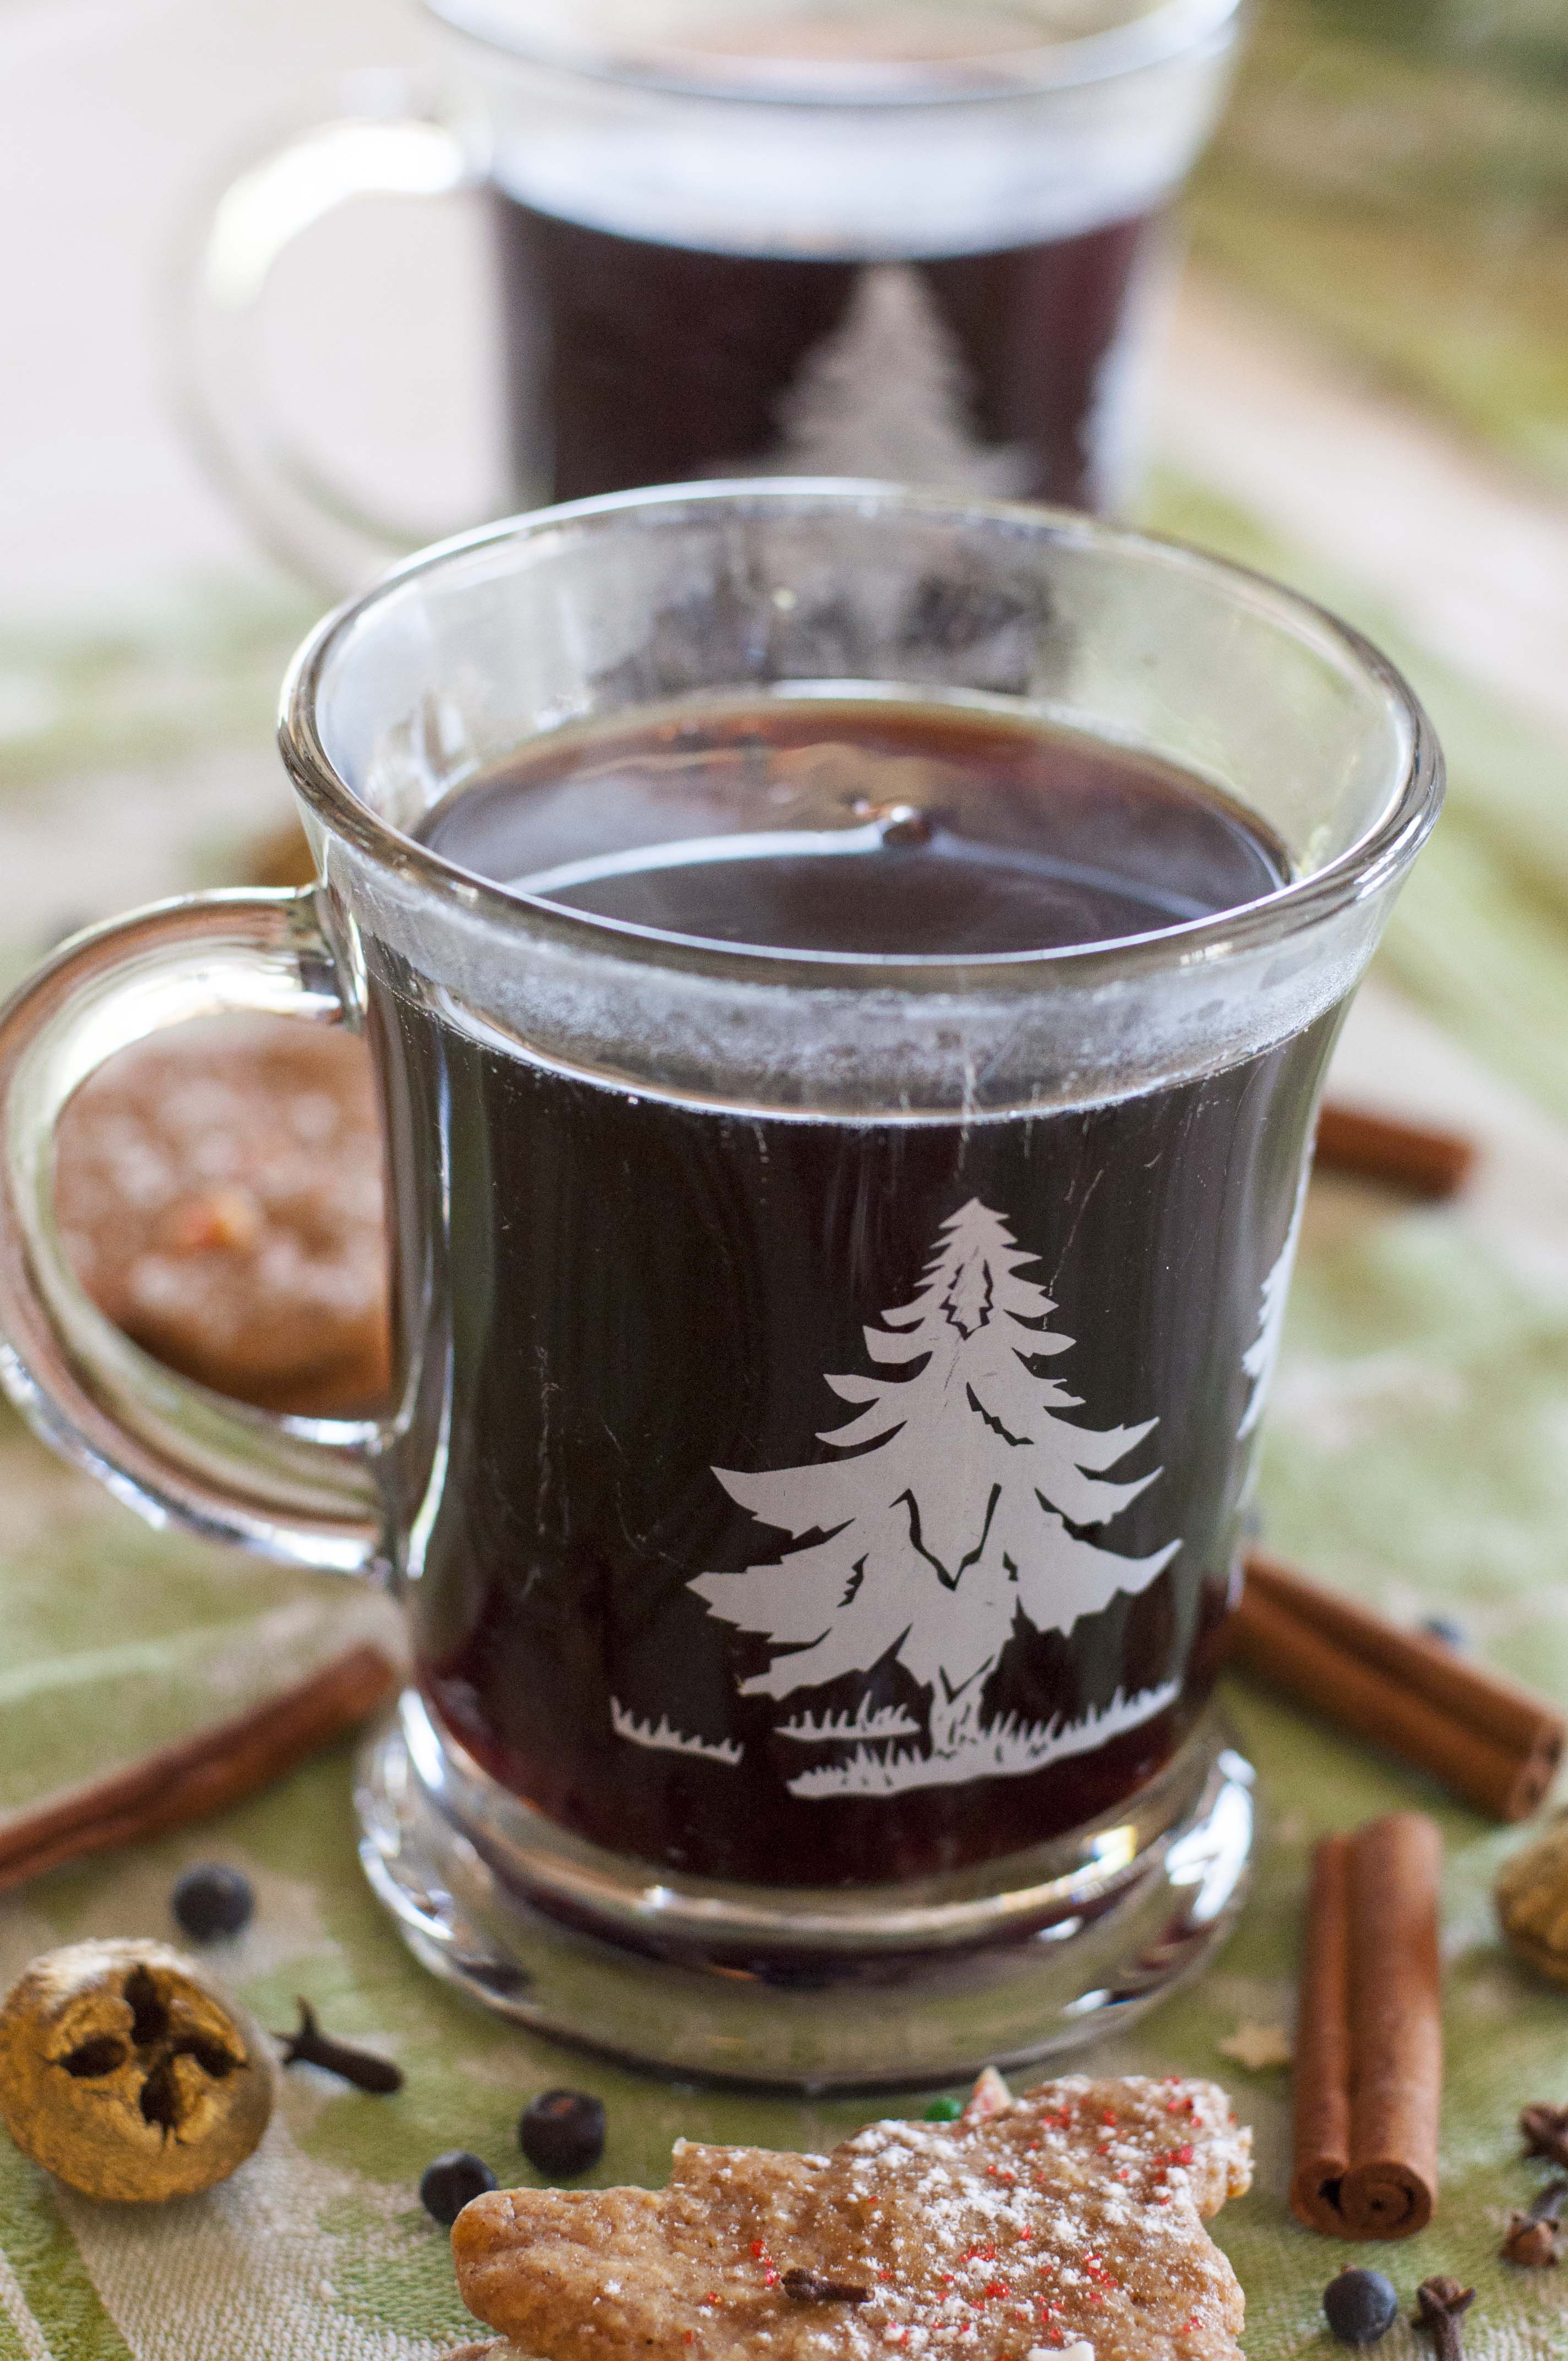 Mulled wine made with nocino wine